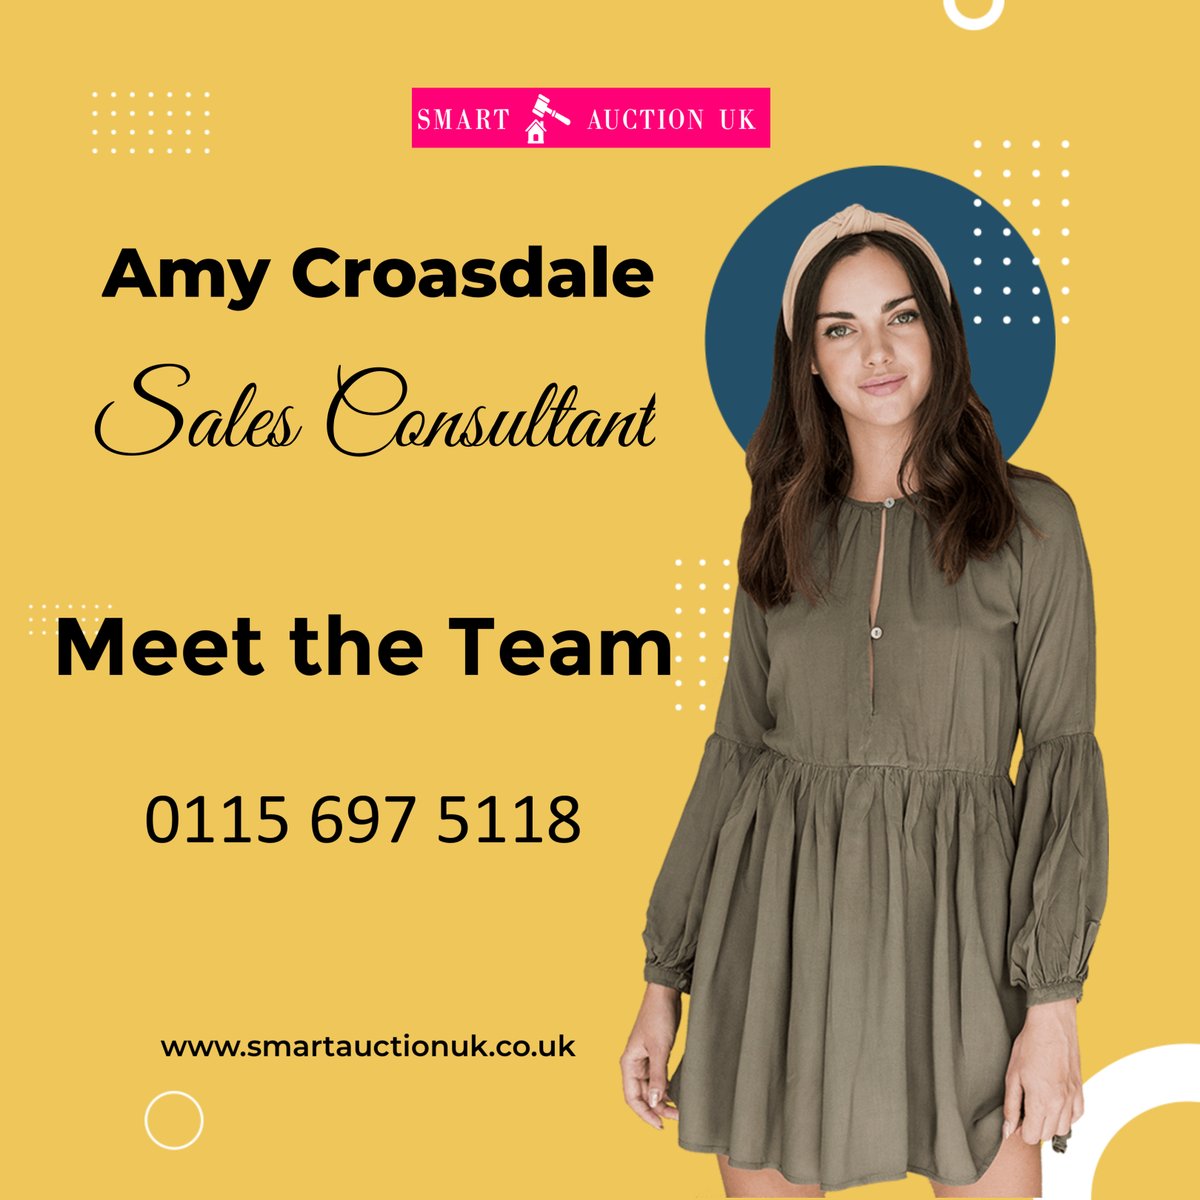 Amy has worked in the property industry since 2017. Amy’s time with Smart Auction UK has been centred working on residential, commercial and mixed-use portfolios for freeholders.
 #freeestateagent #ukmarket #housesales #auction #rentorbuy #ownahouse #meettheteam